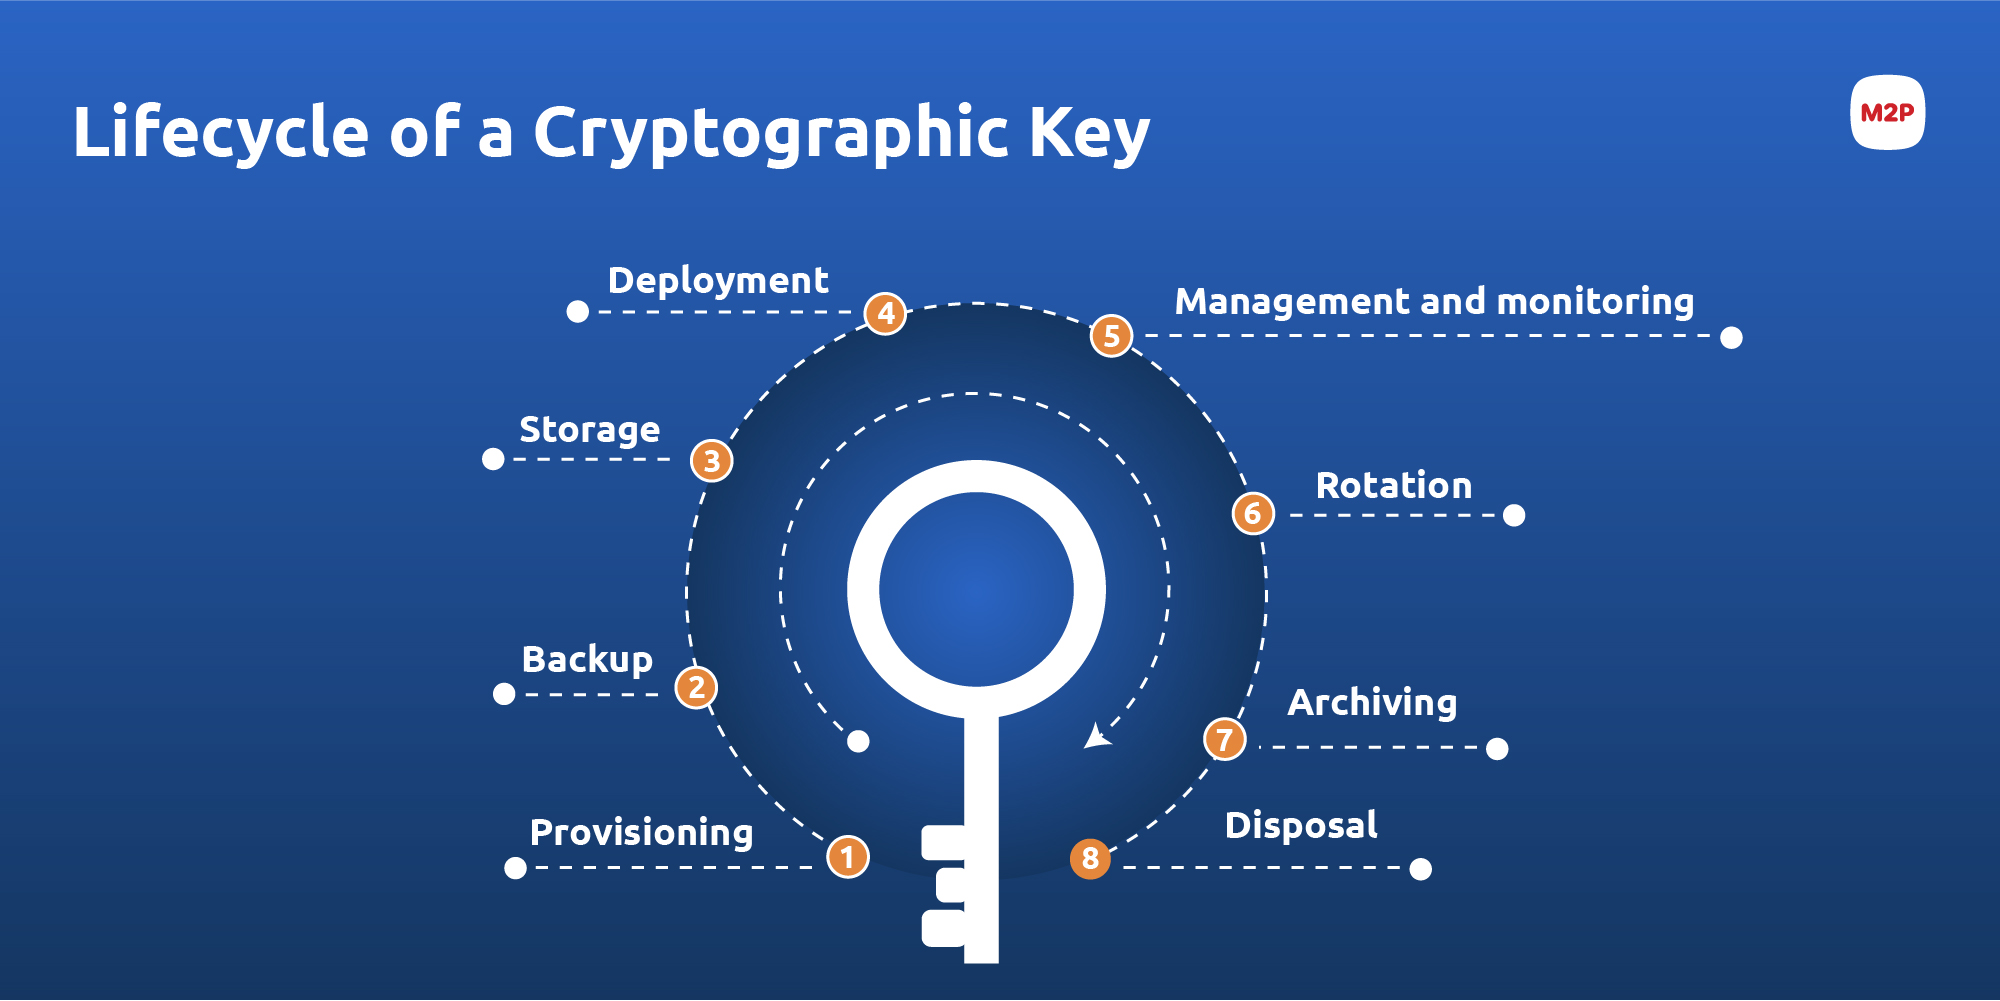 what entity calls in crypto modules to perform cryptographic tasks